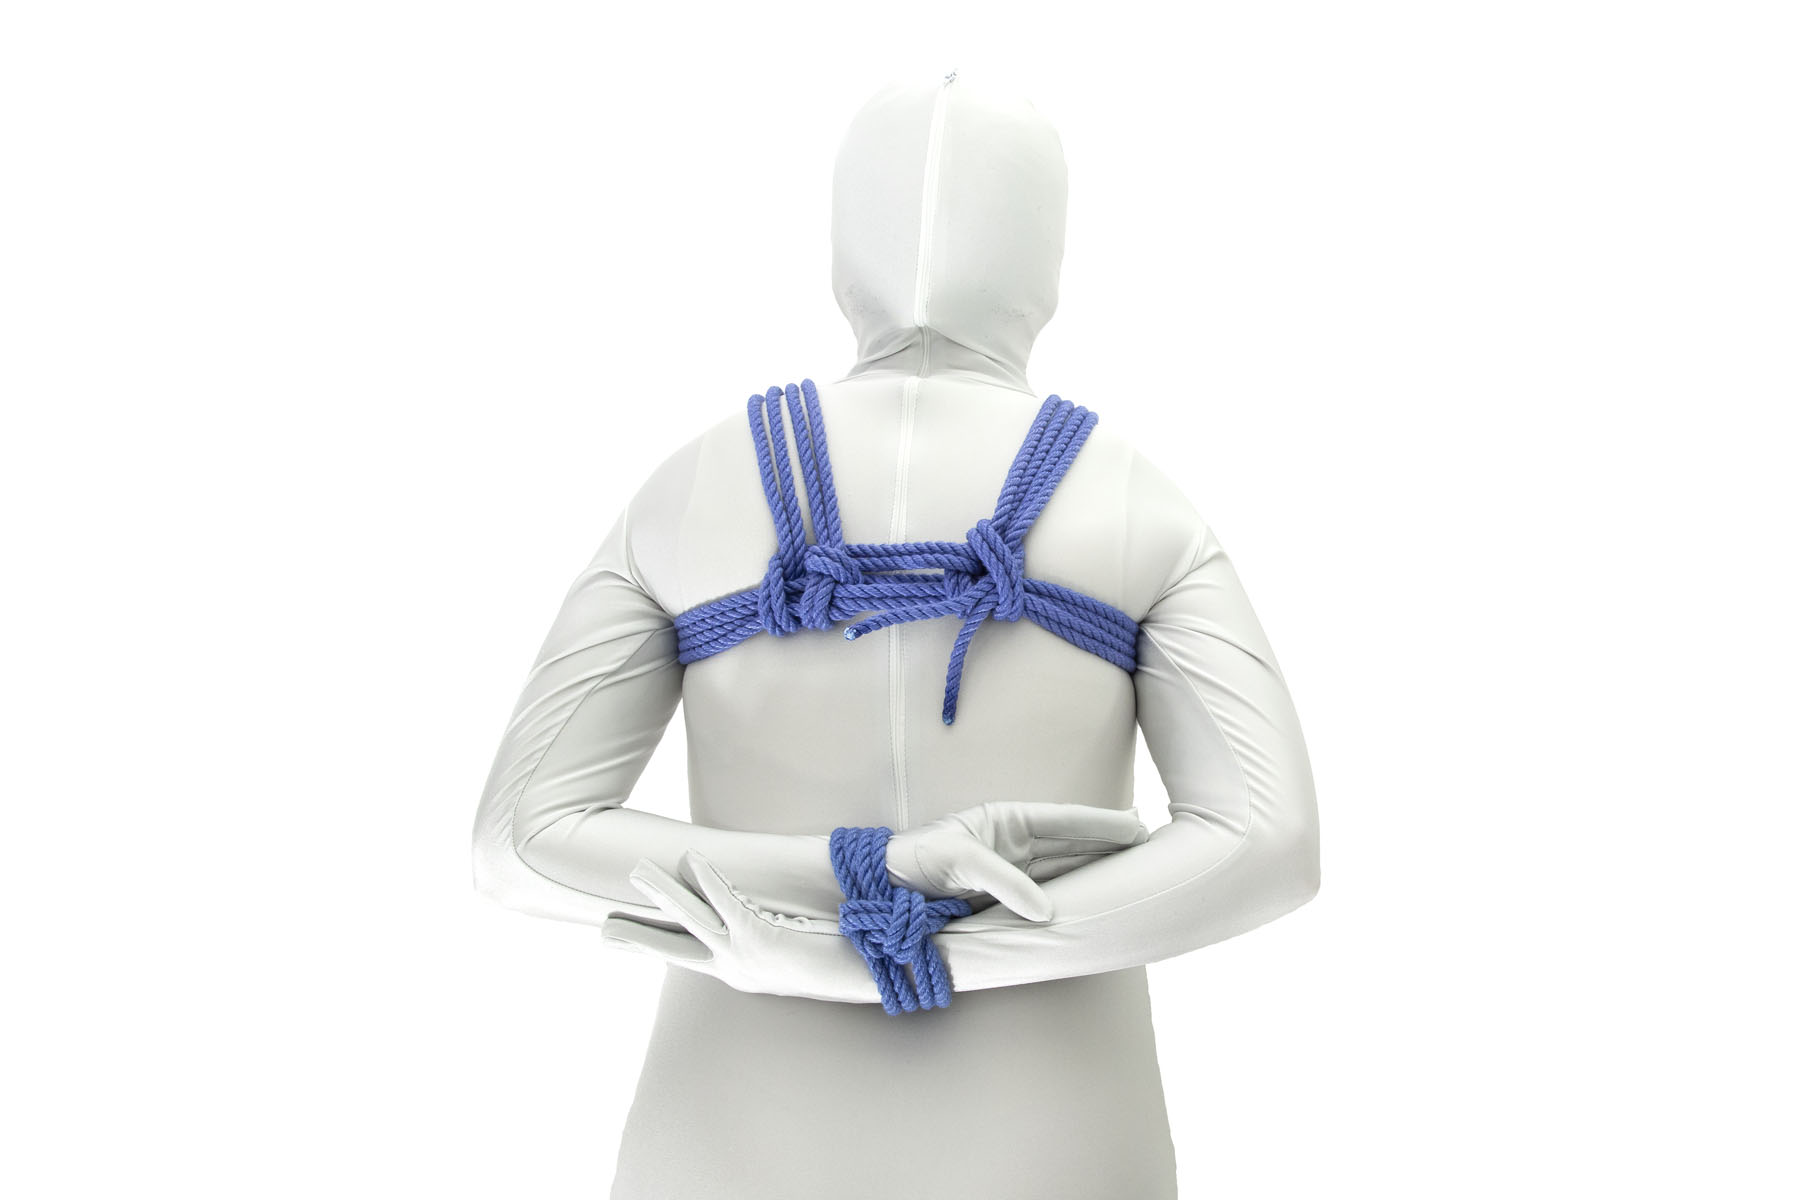 We now see the person from the rear, with a blue wrap going horizontally across their upper back and shoulder lines going from the chest wrap over the shoulders. Their forearms are antiparallel behind their back and their wrists are tied together with a two column tie.